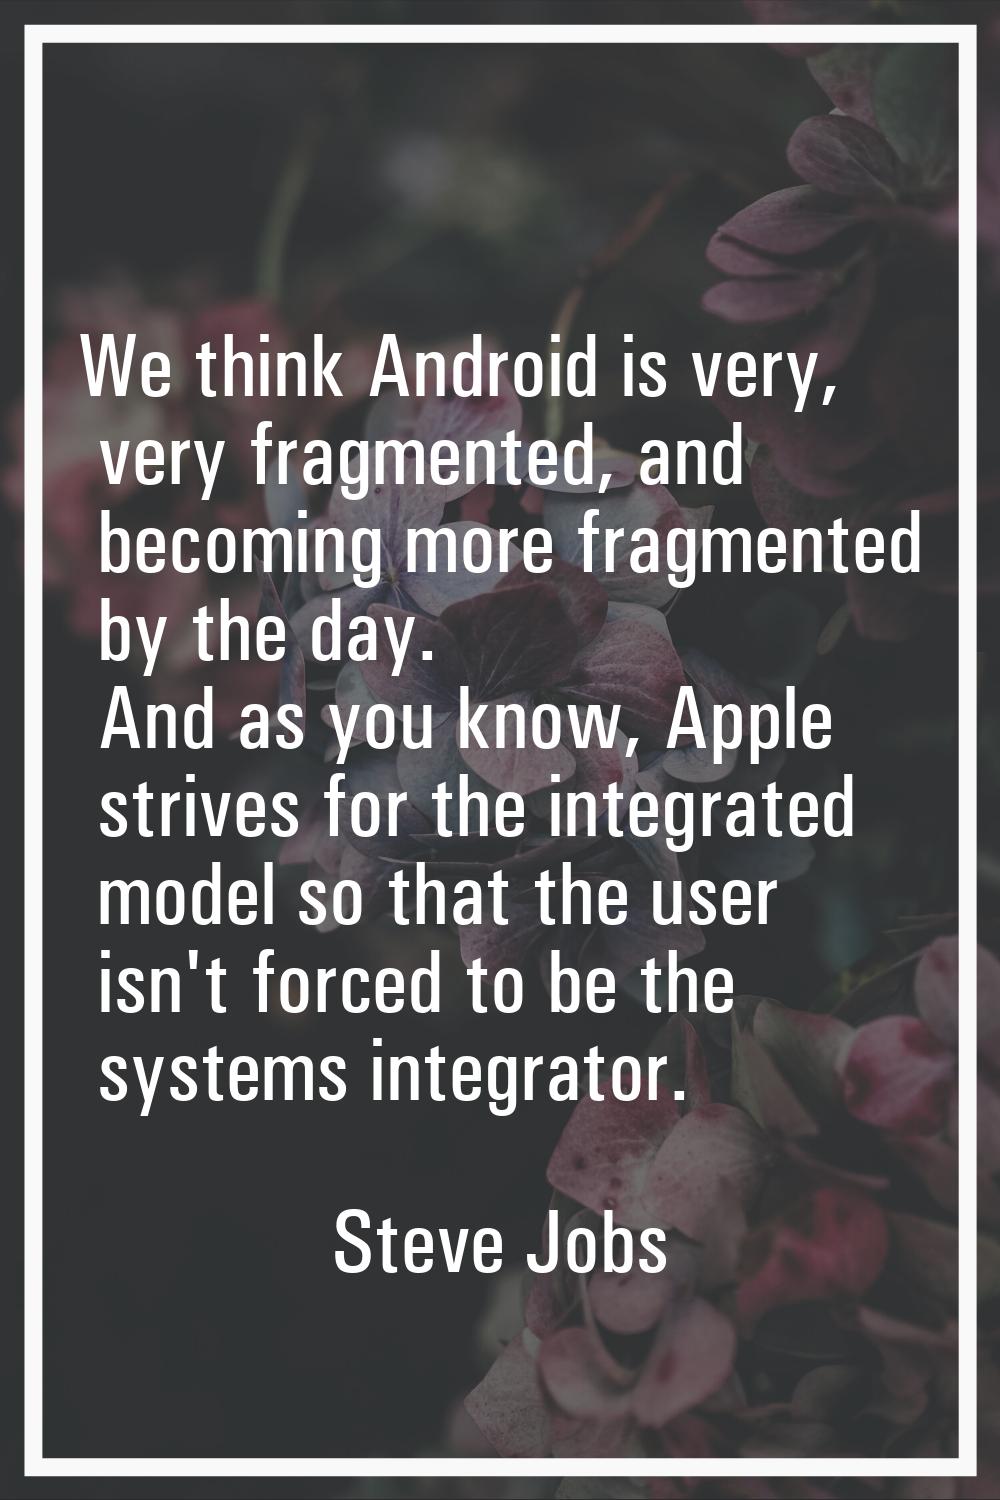 We think Android is very, very fragmented, and becoming more fragmented by the day. And as you know